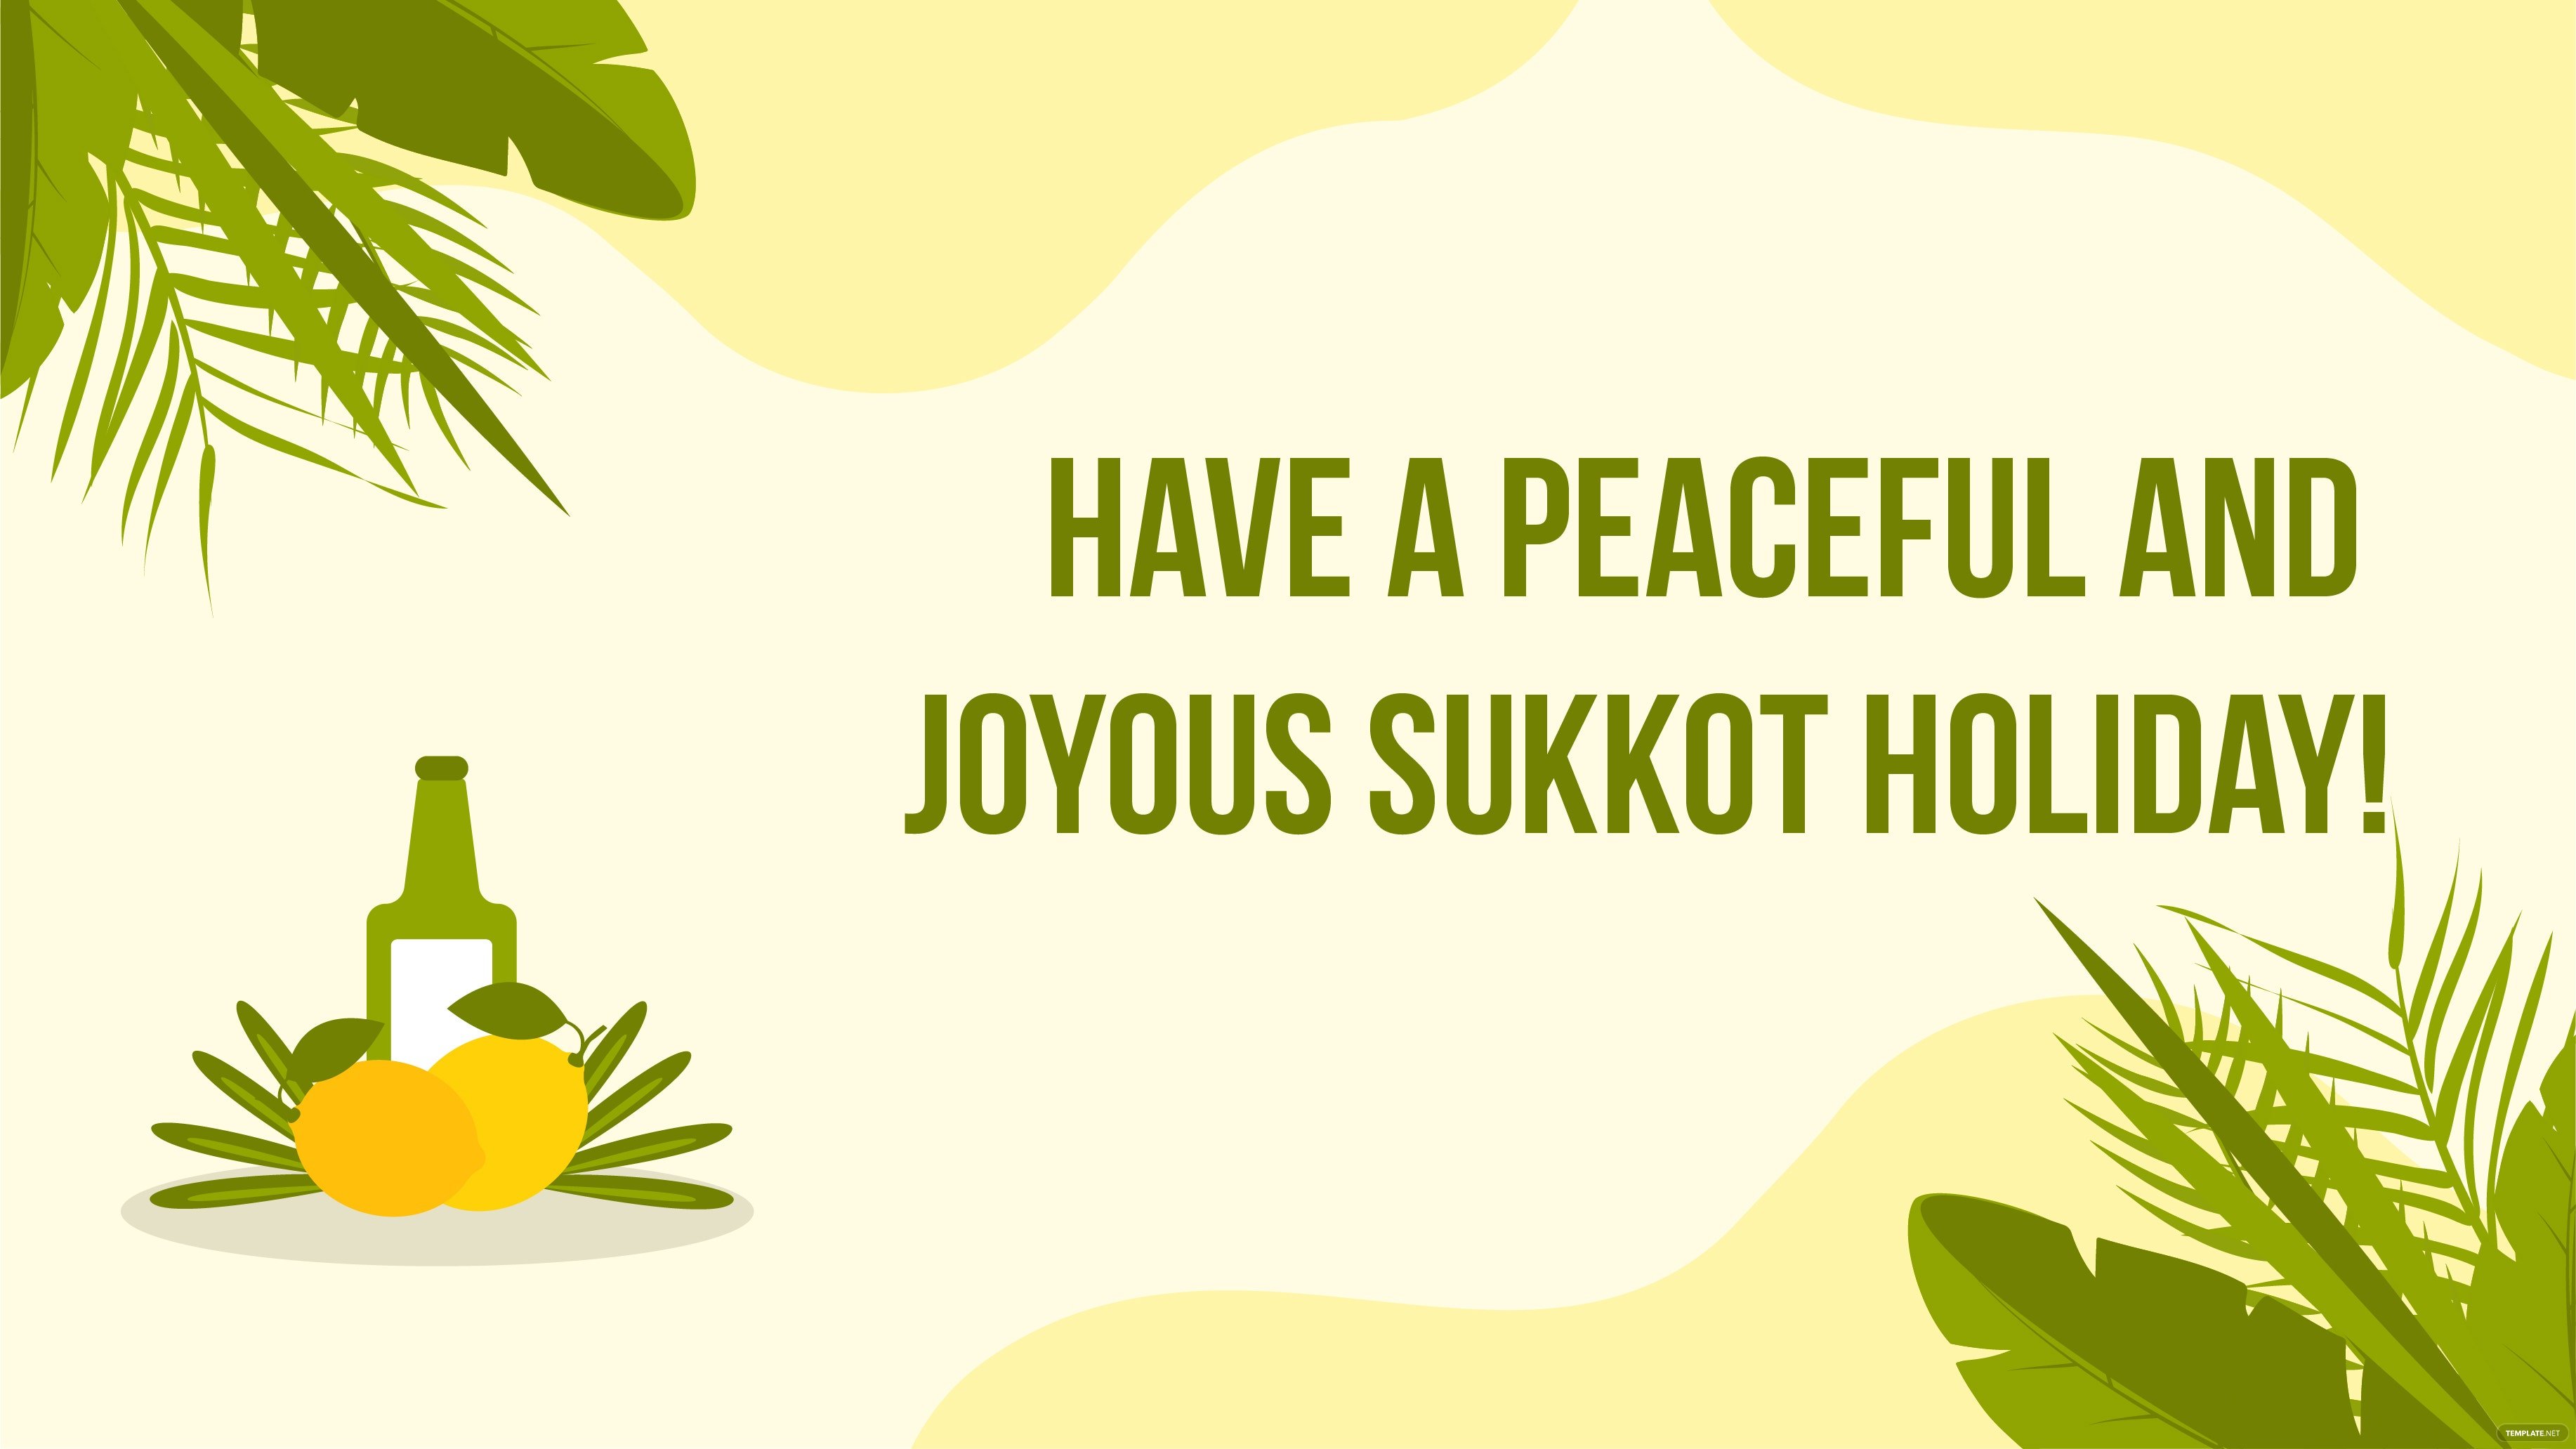 sukkot greeting card background ideas and examples